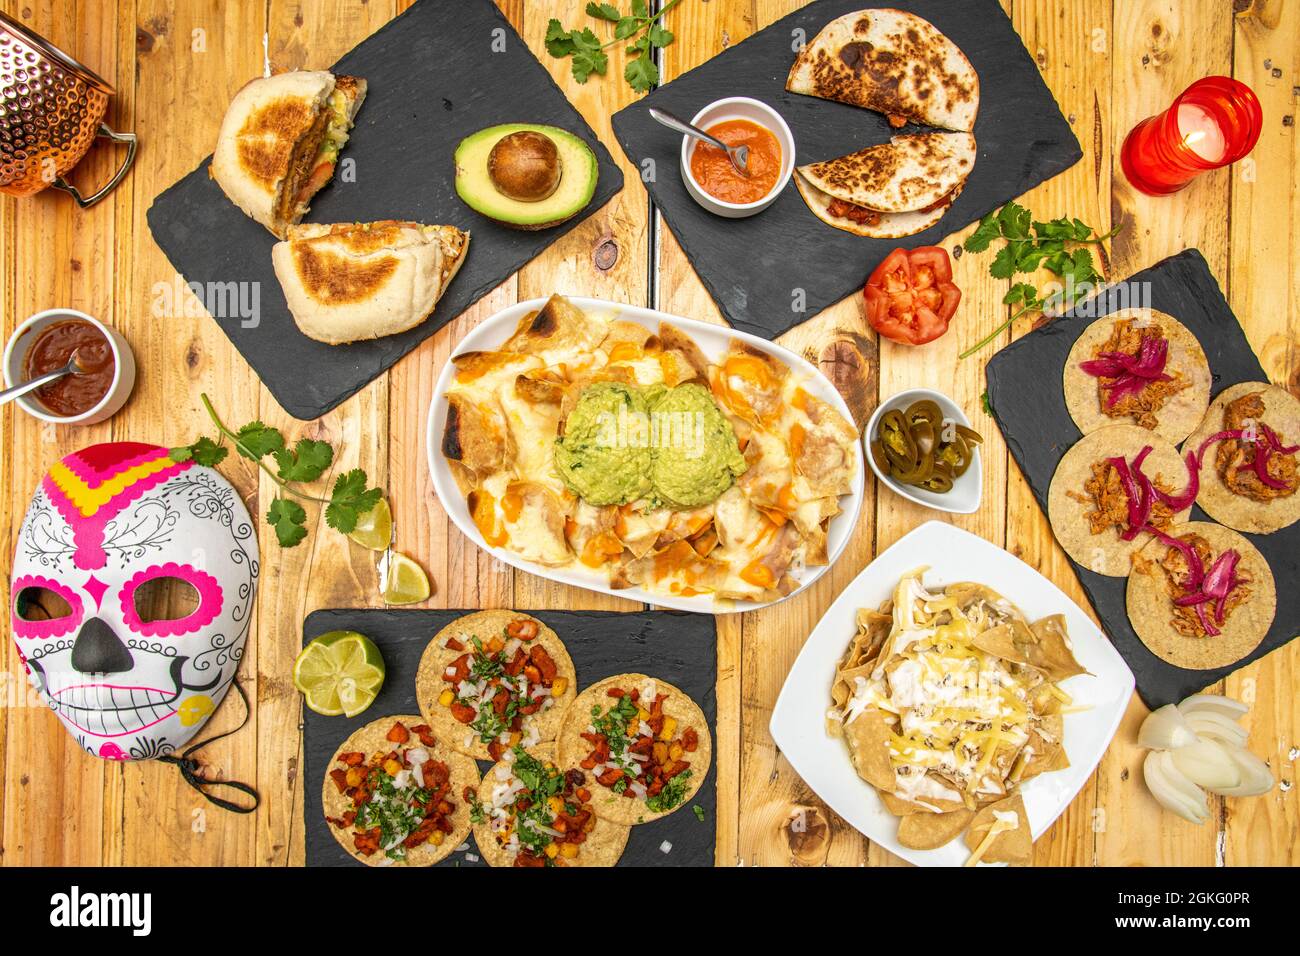 Top view image of set of Mexican dishes and catrina mask. Cochinita pibil tacos, pastor tacos, nachos with guacamole, quesadillas, jalapeños, limes an Stock Photo